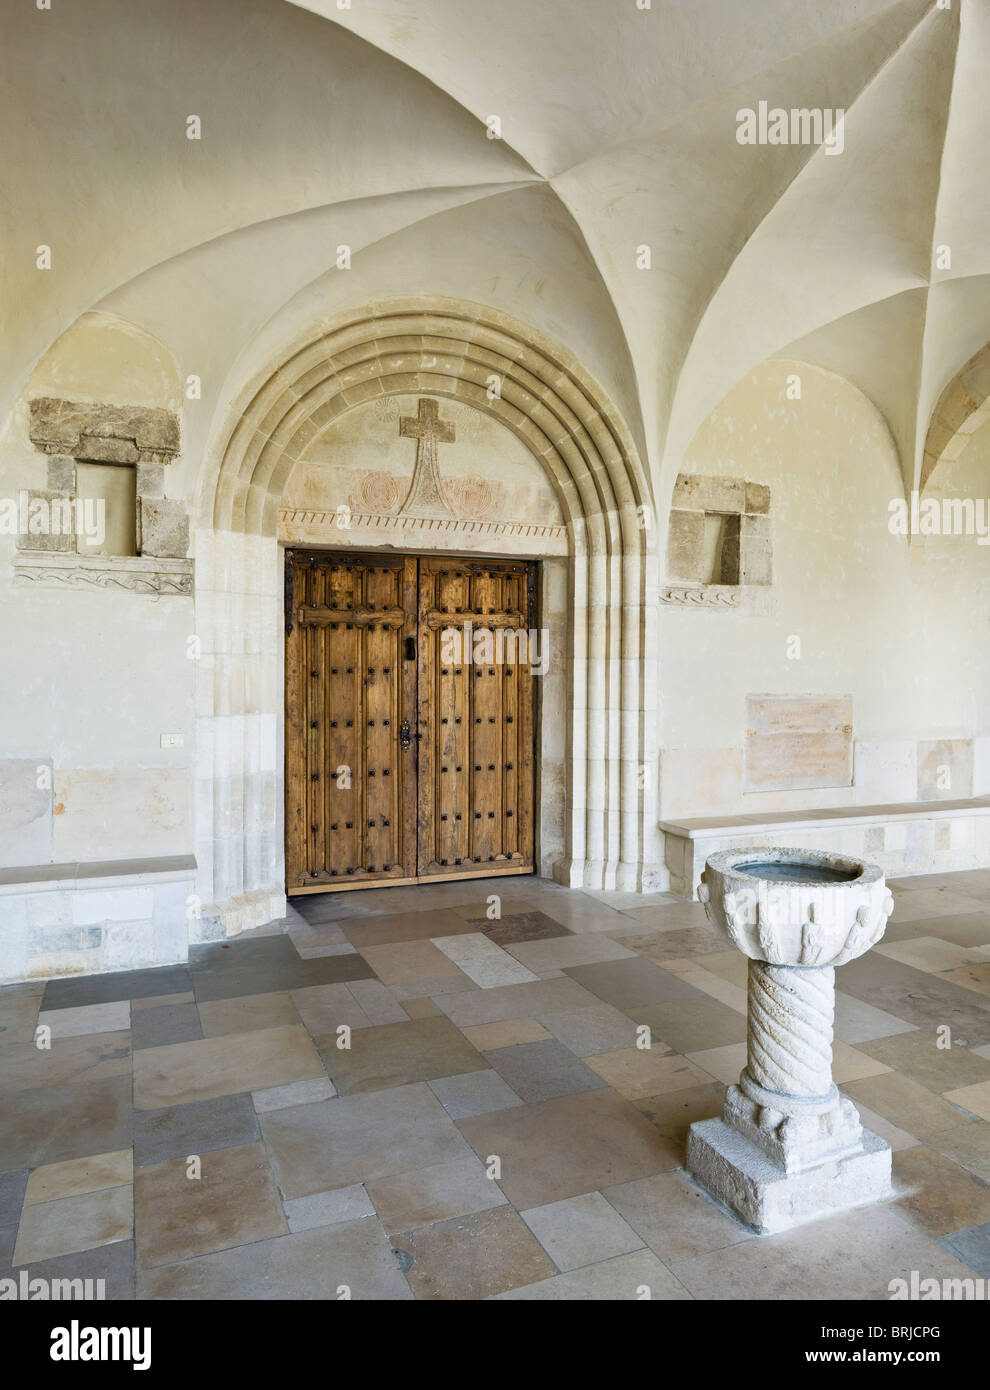 Entrance to the church at Abbaye de St Remy (Rochefort). 1 of 6 Trappist breweries in Belgium Stock Photo